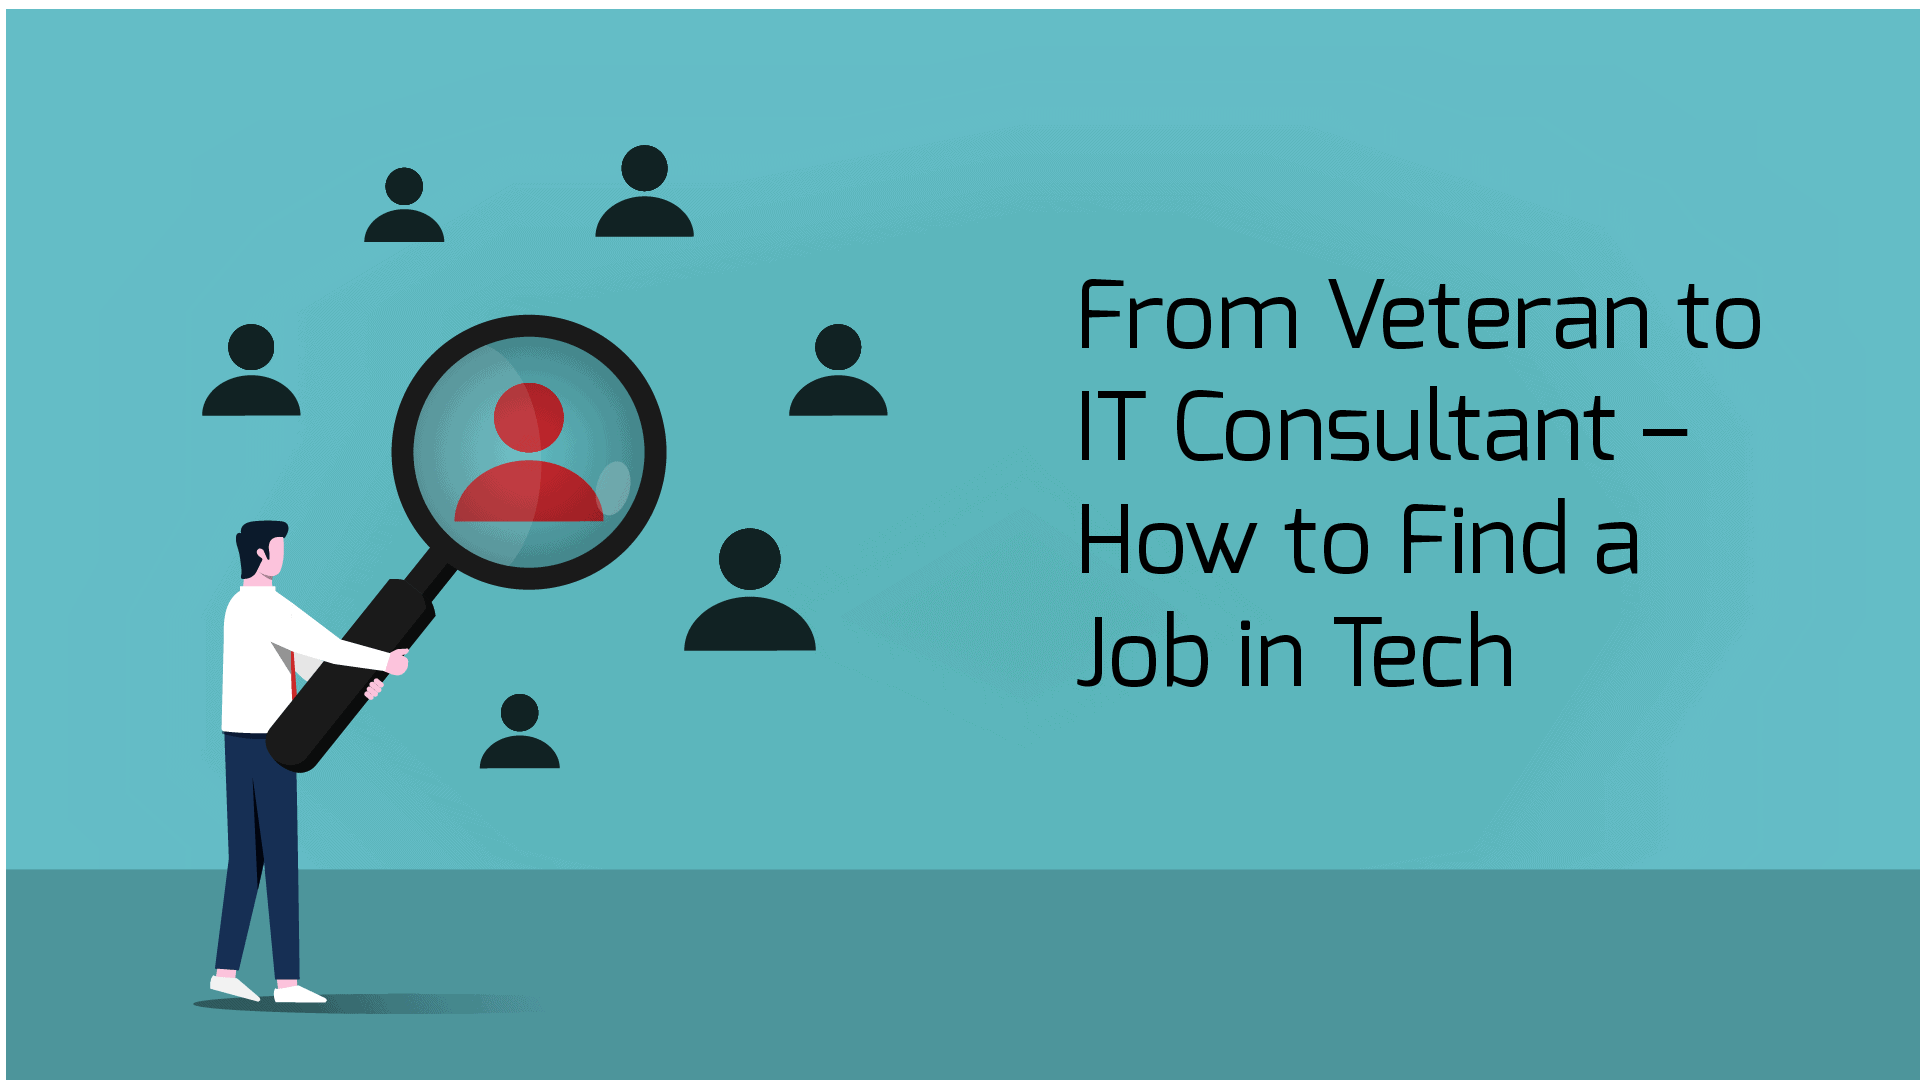 From Veteran to IT Consultant – How to Find a Job in Tech